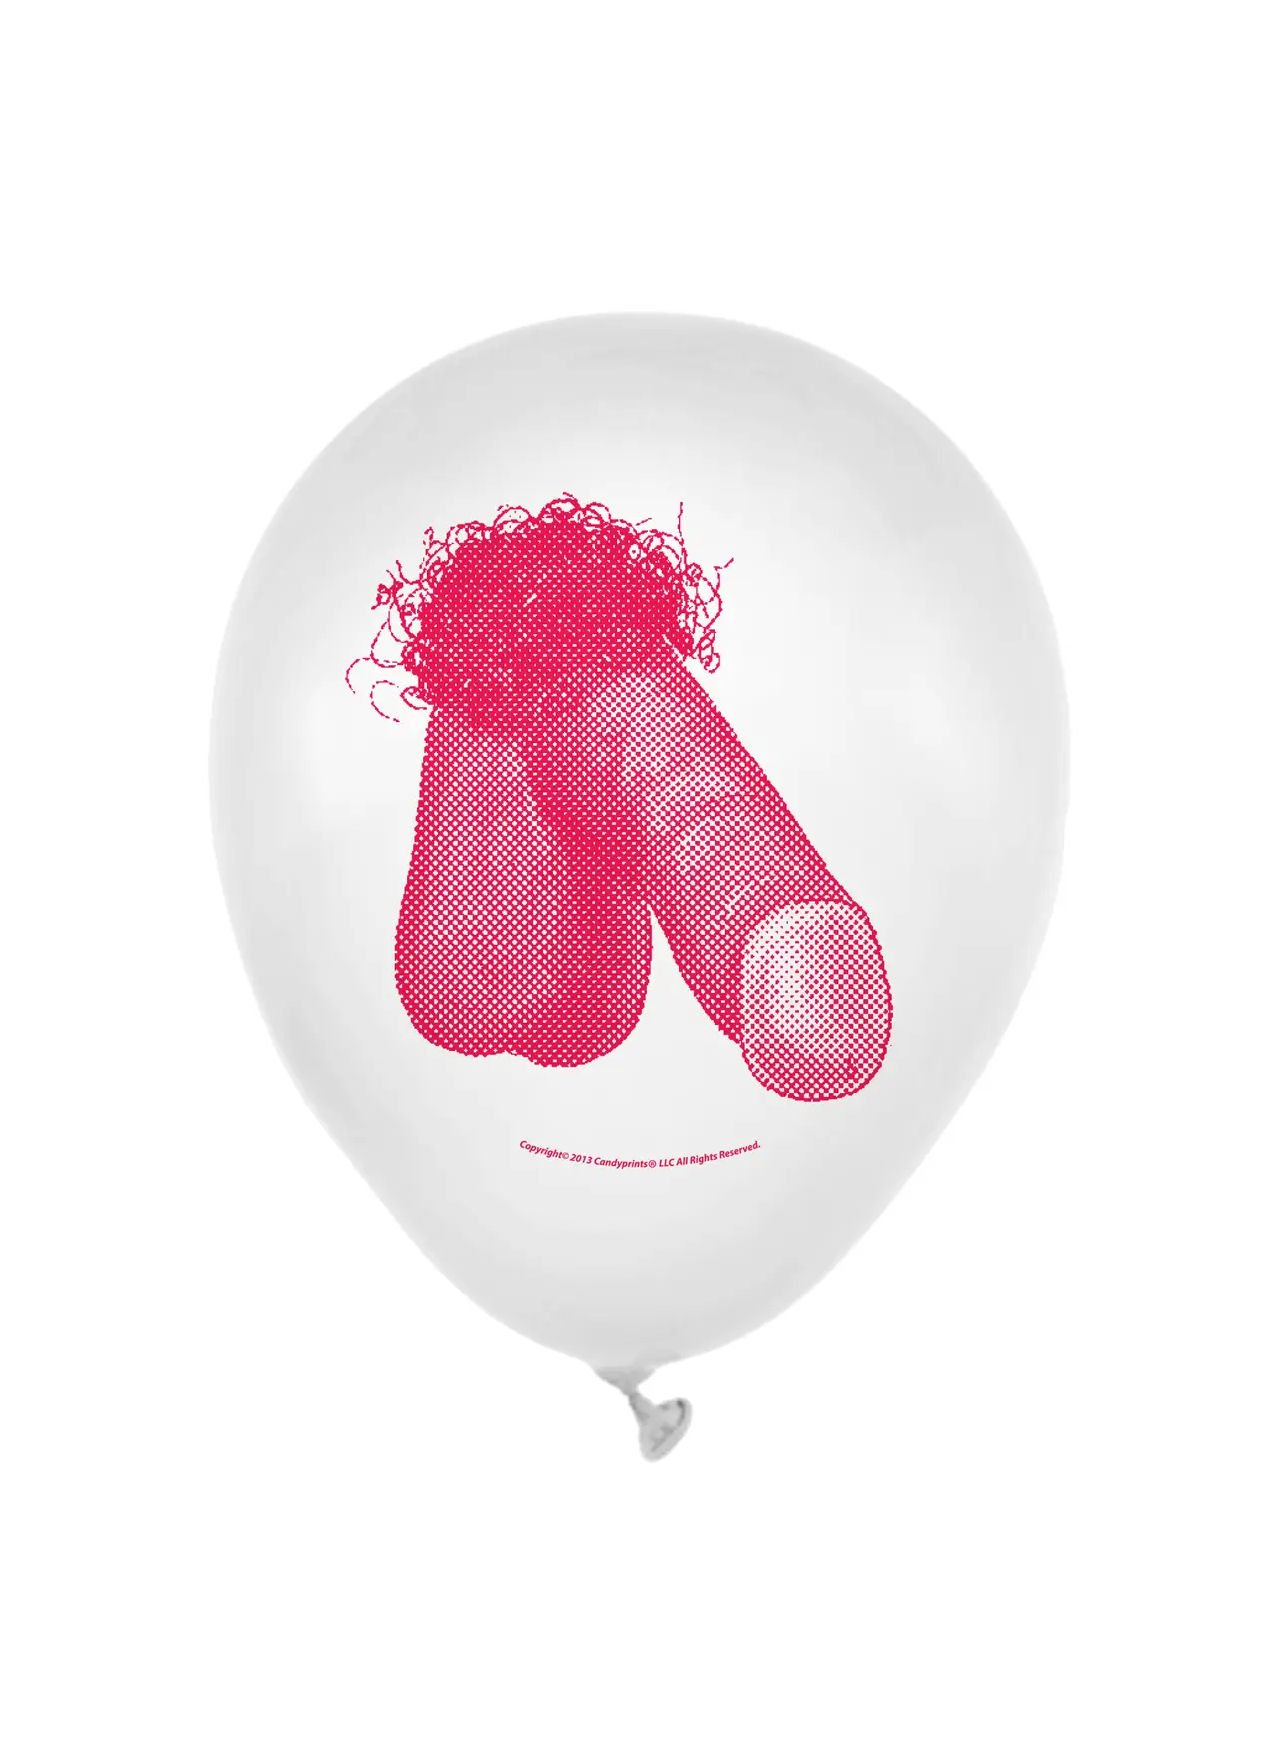 Dirty Penis Balloons — Lost Objects, Found Treasures